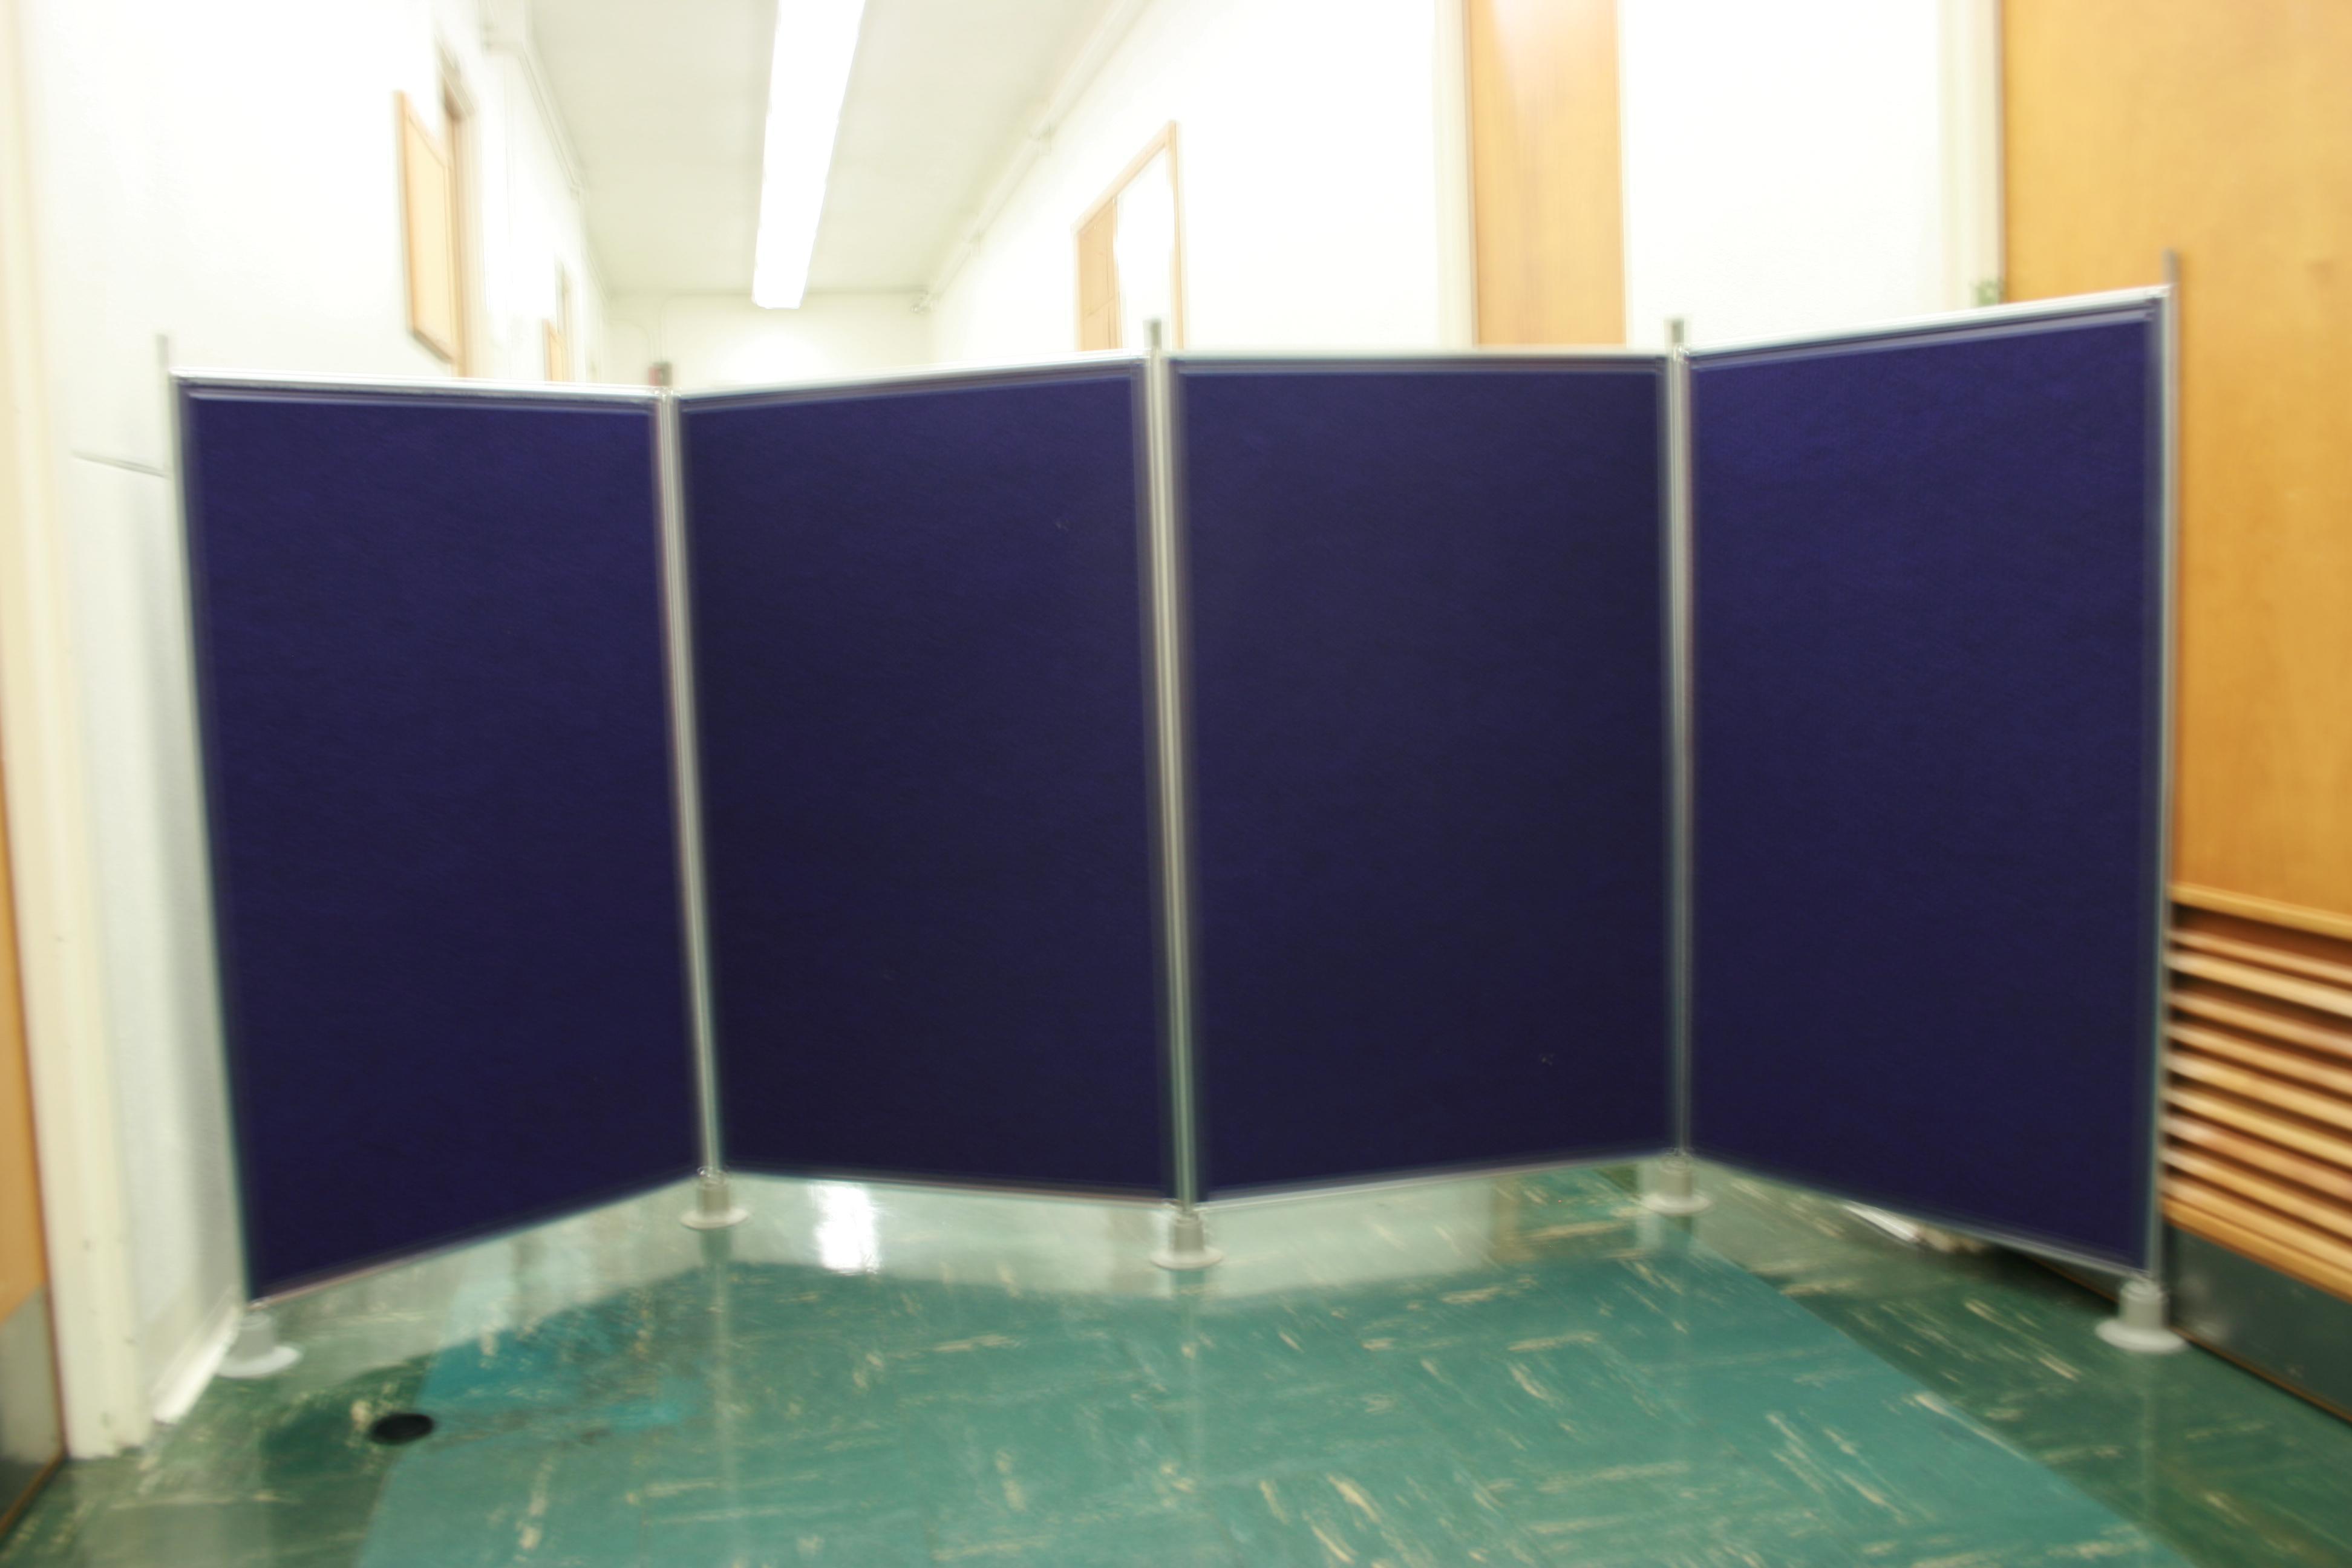 Full view of plain 4 pannel display